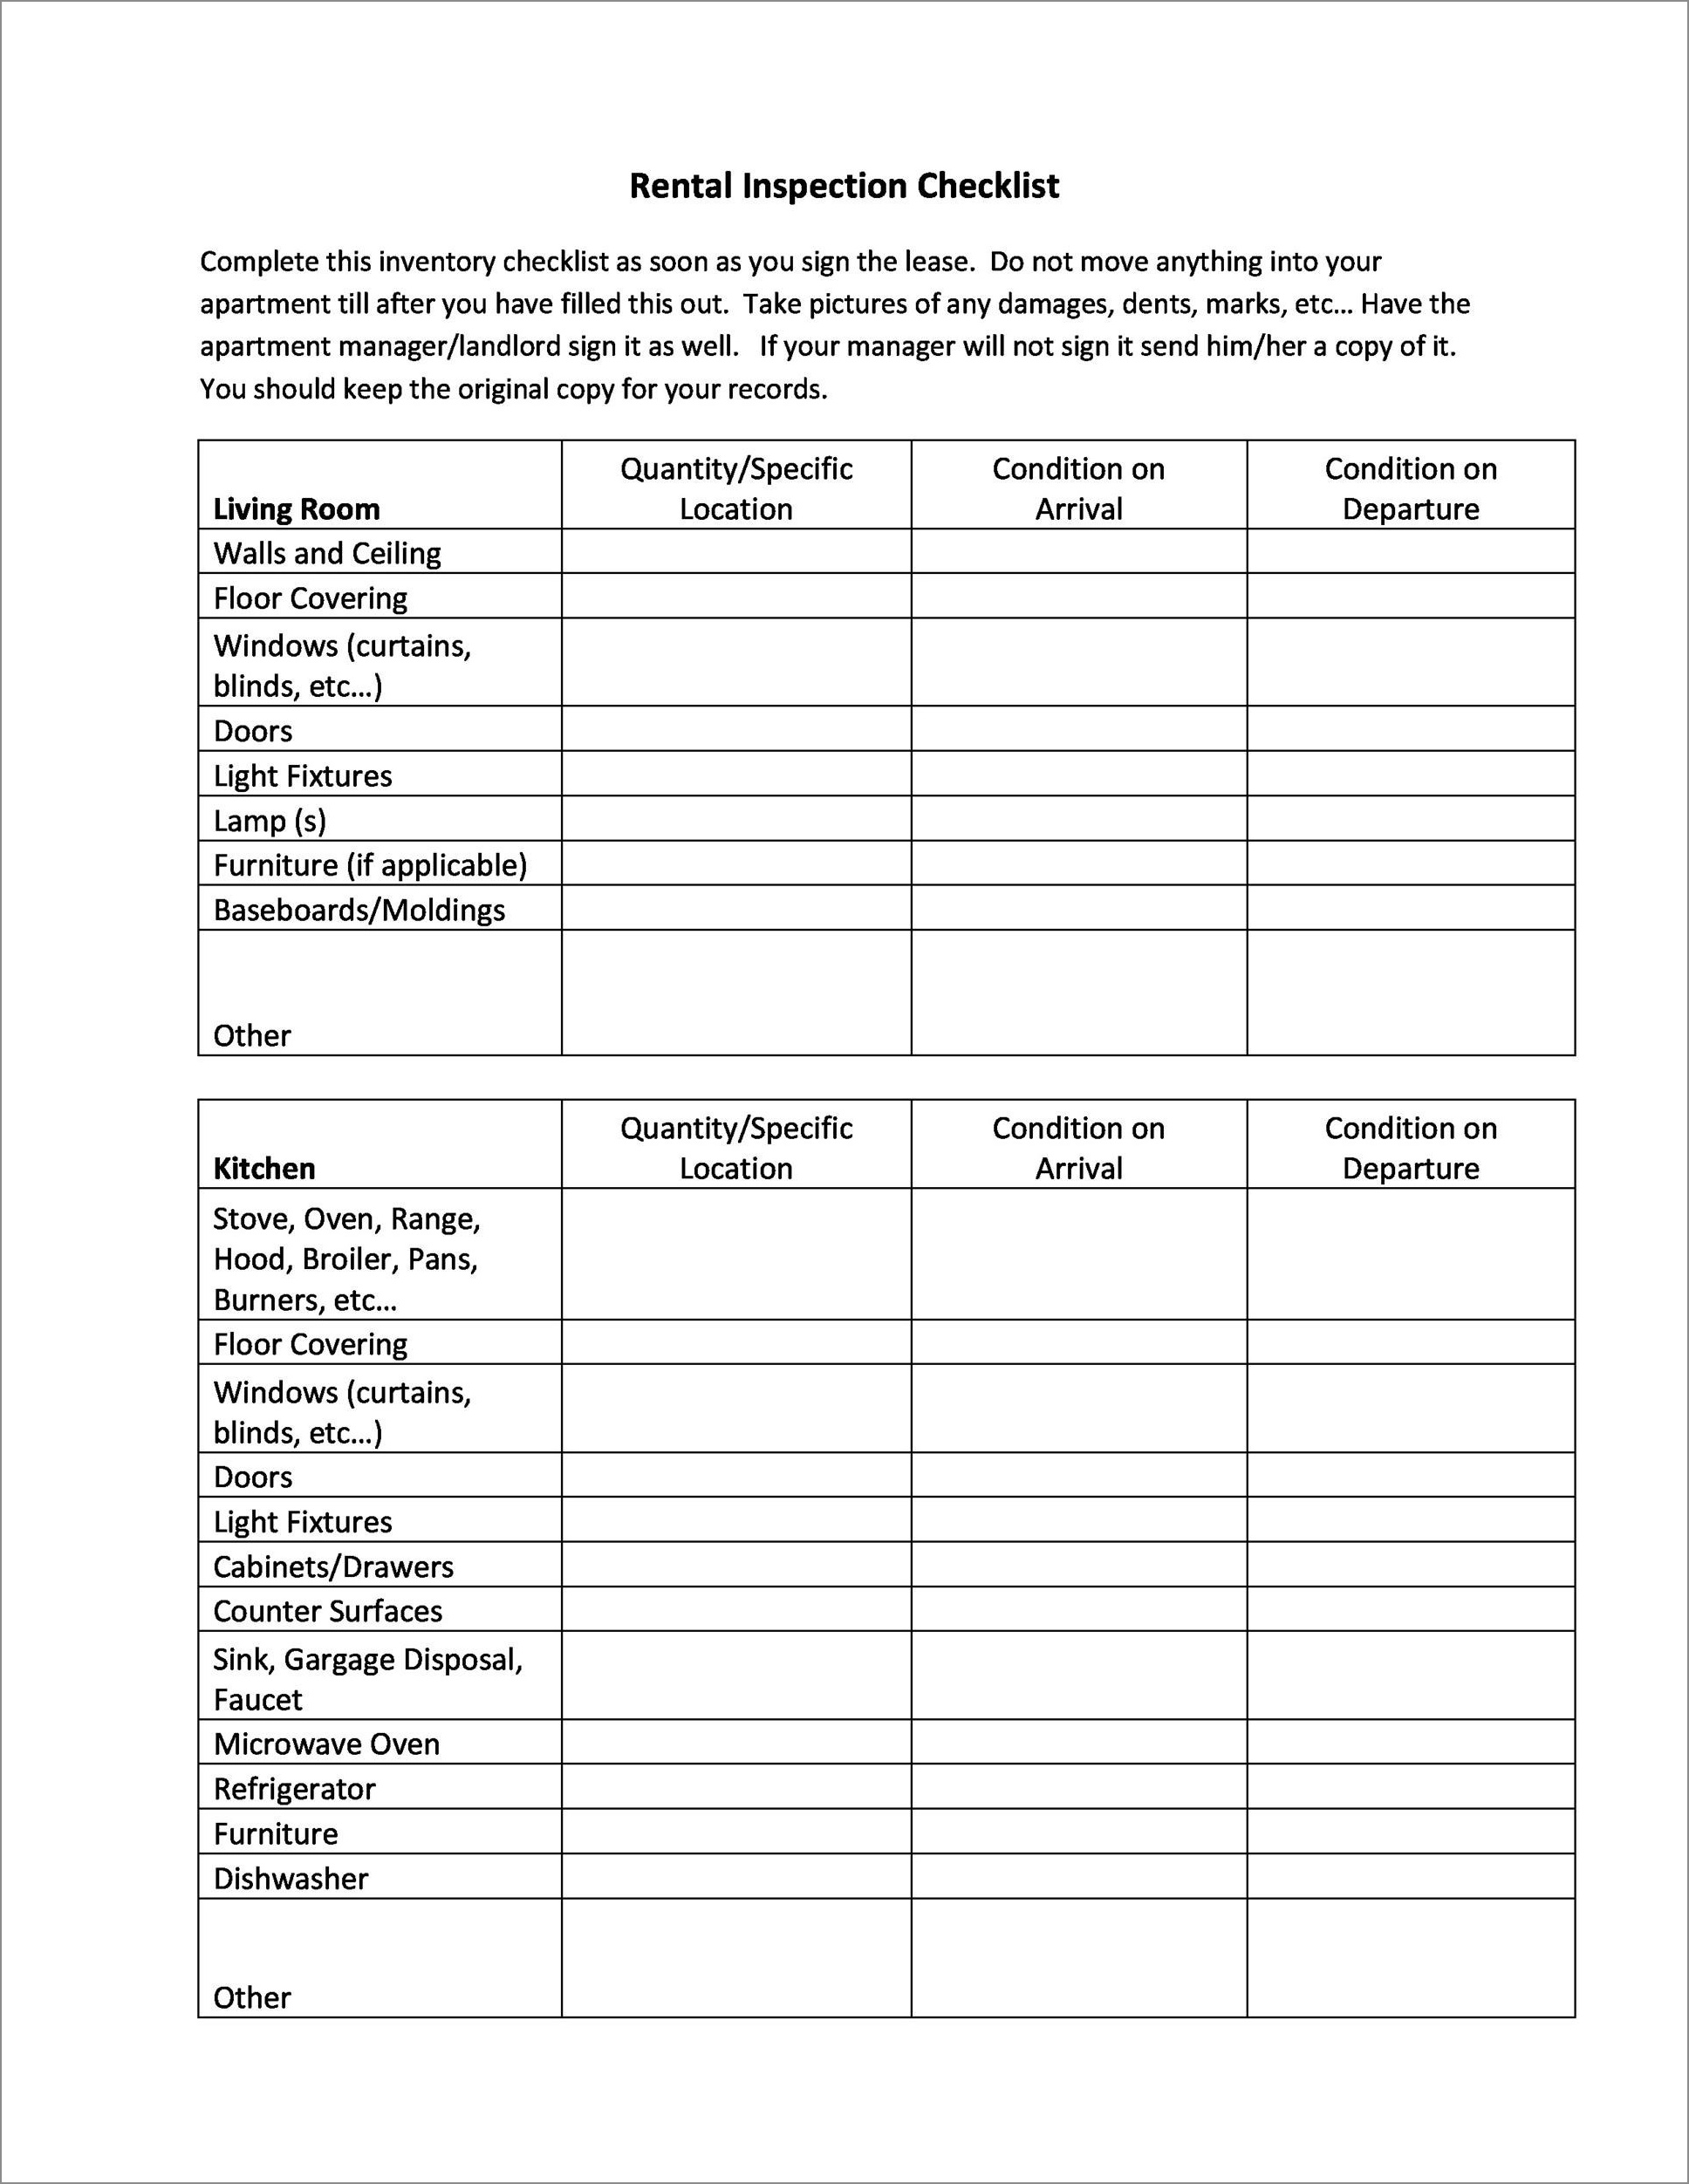 sample of rental inspection checklist template